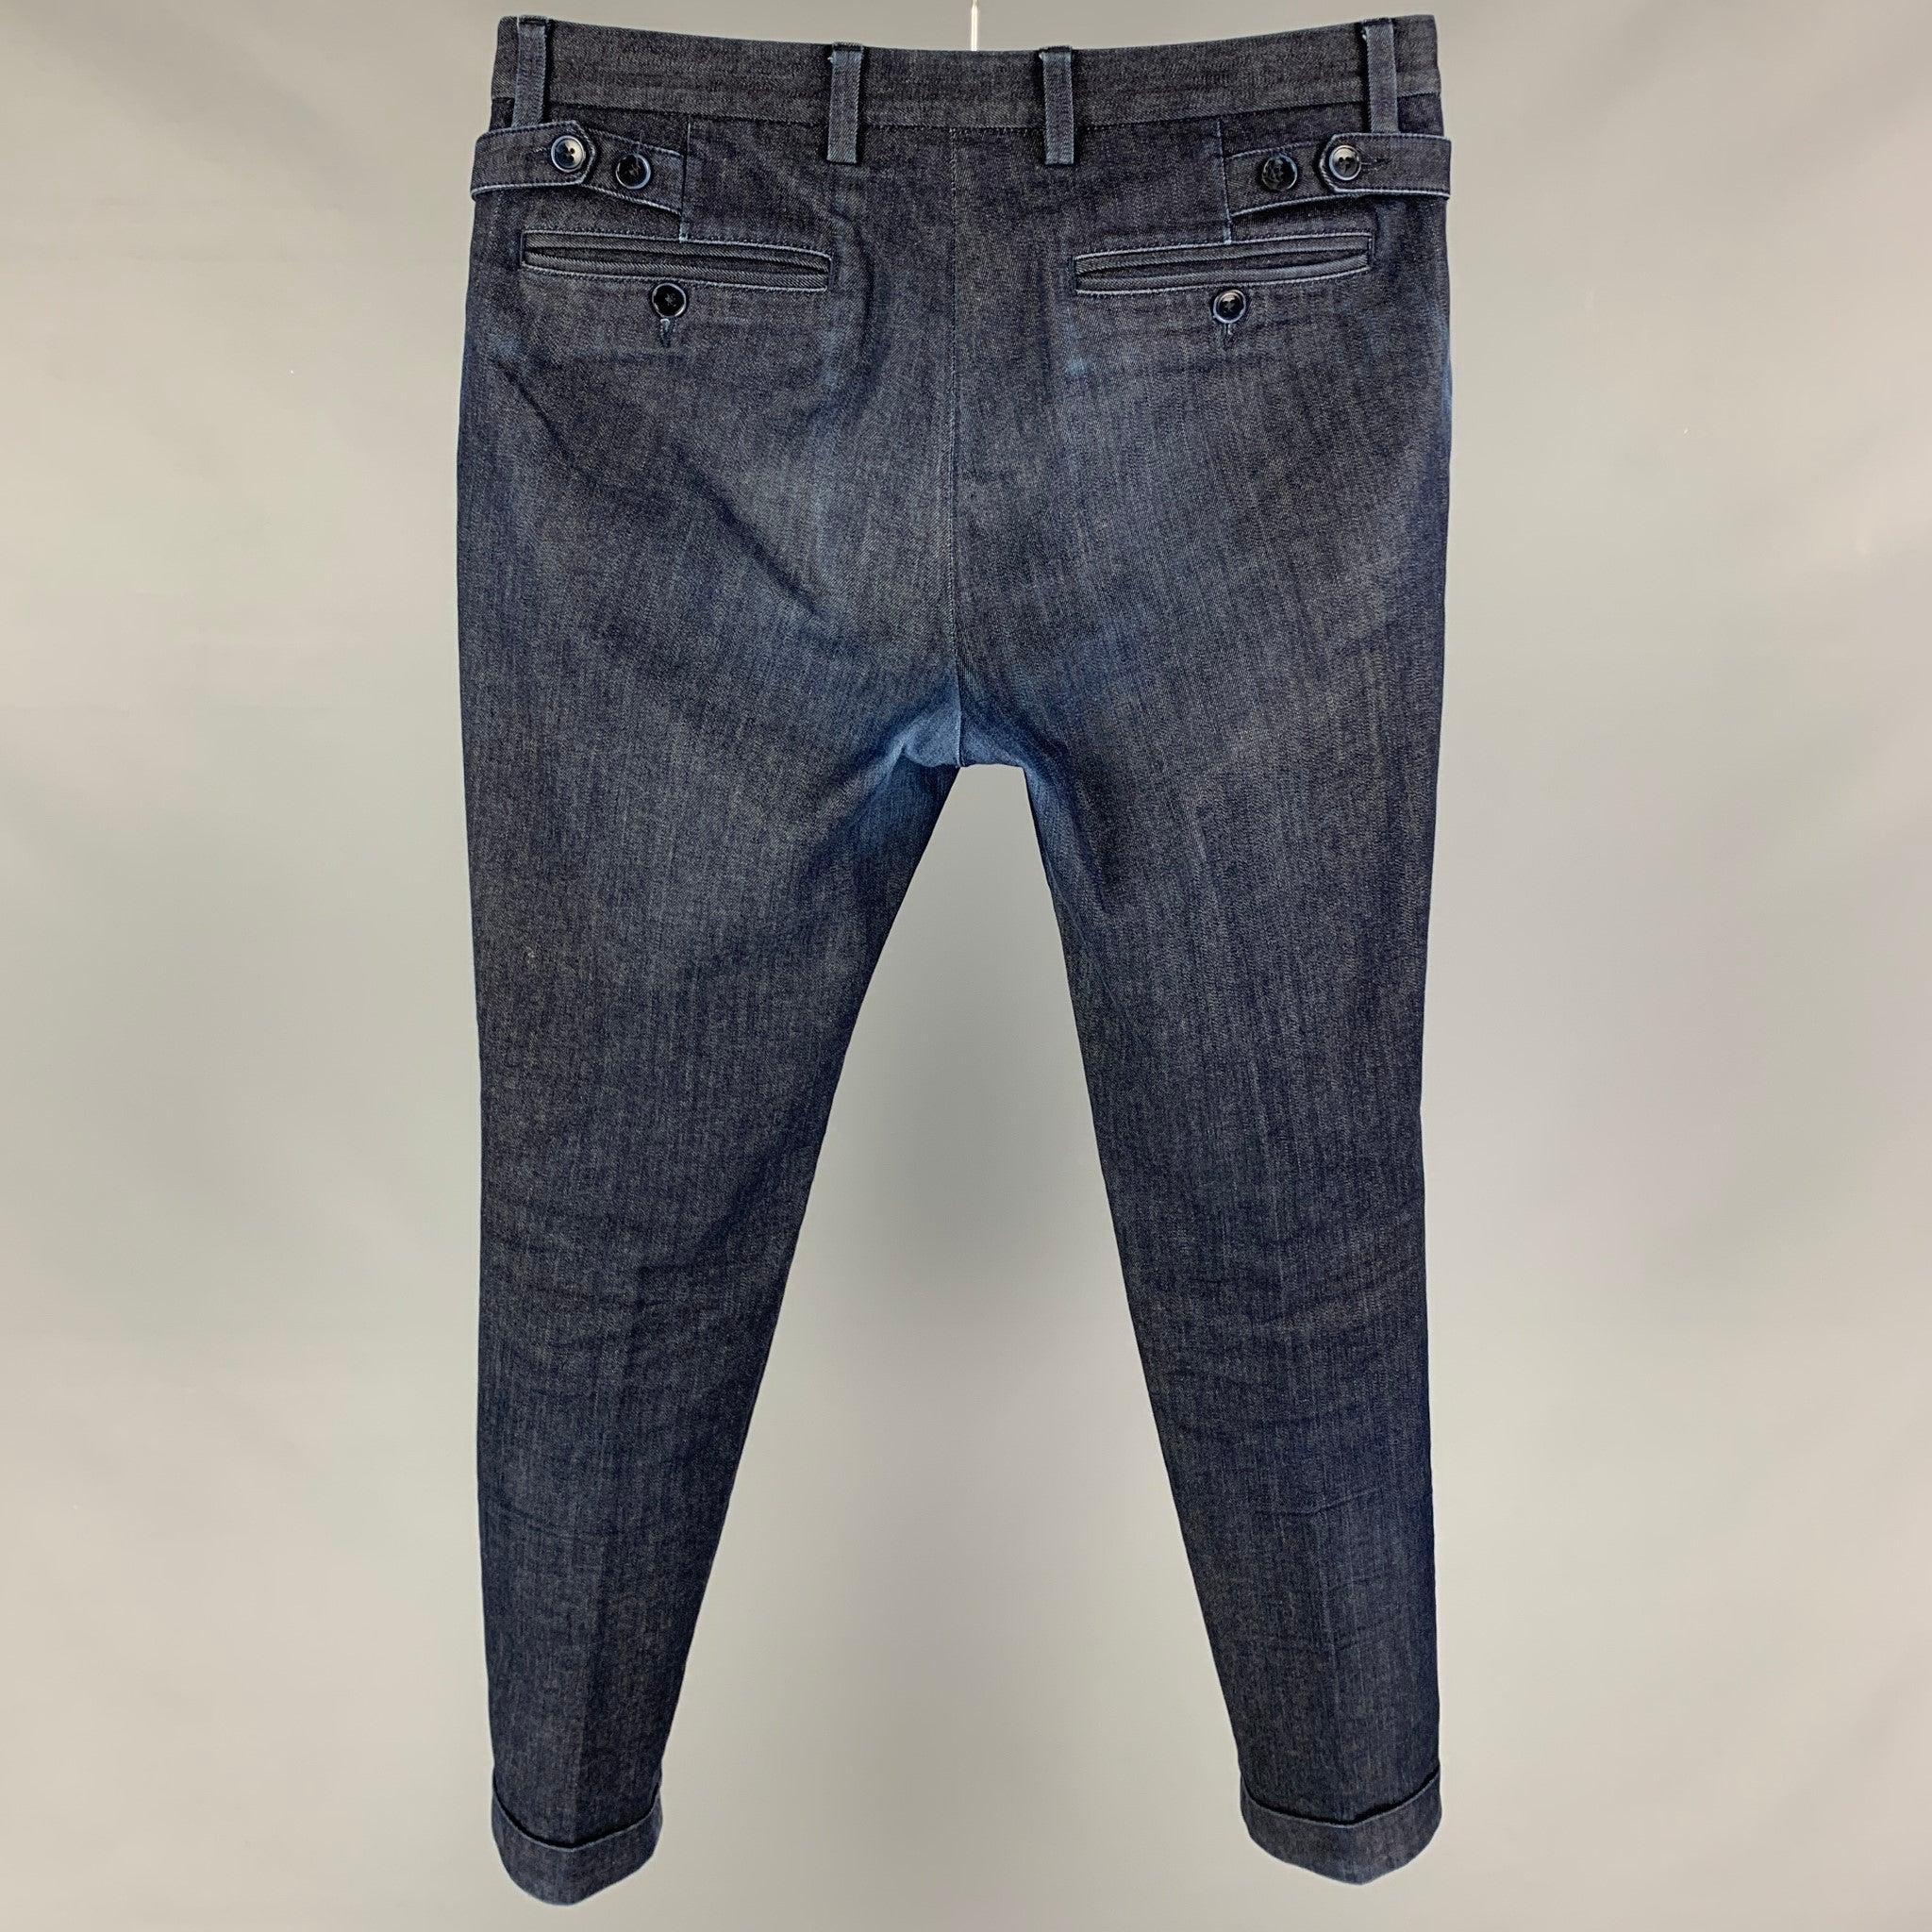 DOLCE & GABBANA Size 28 Blue Indigo Cotton Blend Slim Cuffed Jeans In Good Condition For Sale In San Francisco, CA